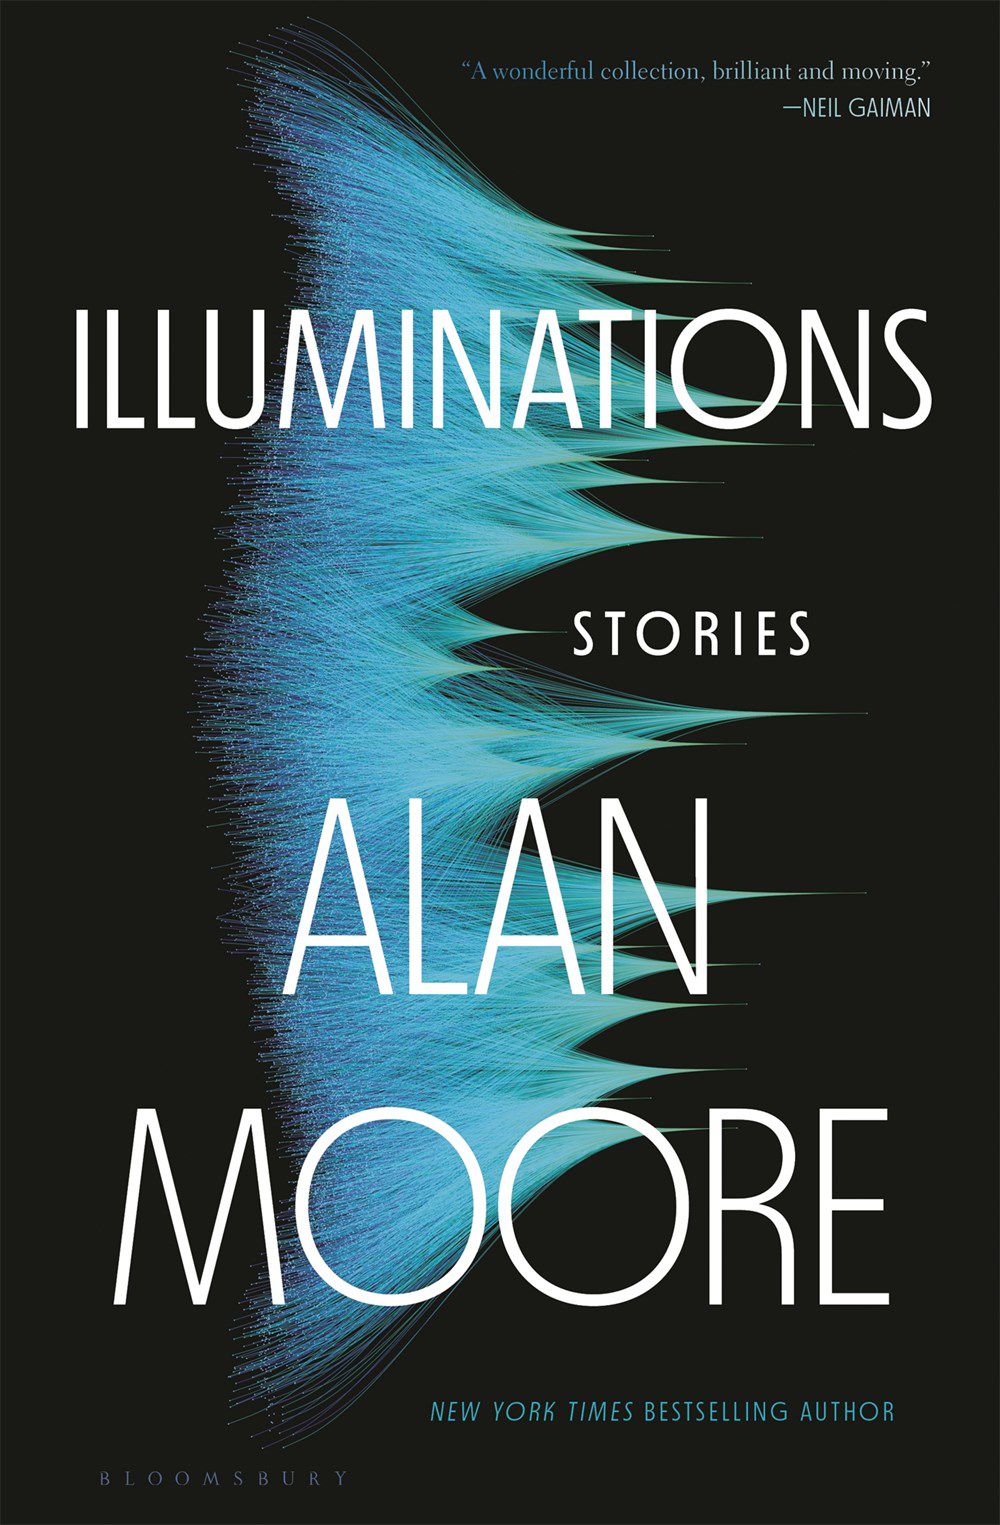 Cover image for Alan Moore's Illuminations, depicting what appear to be wispy sideways blue mountain peaks